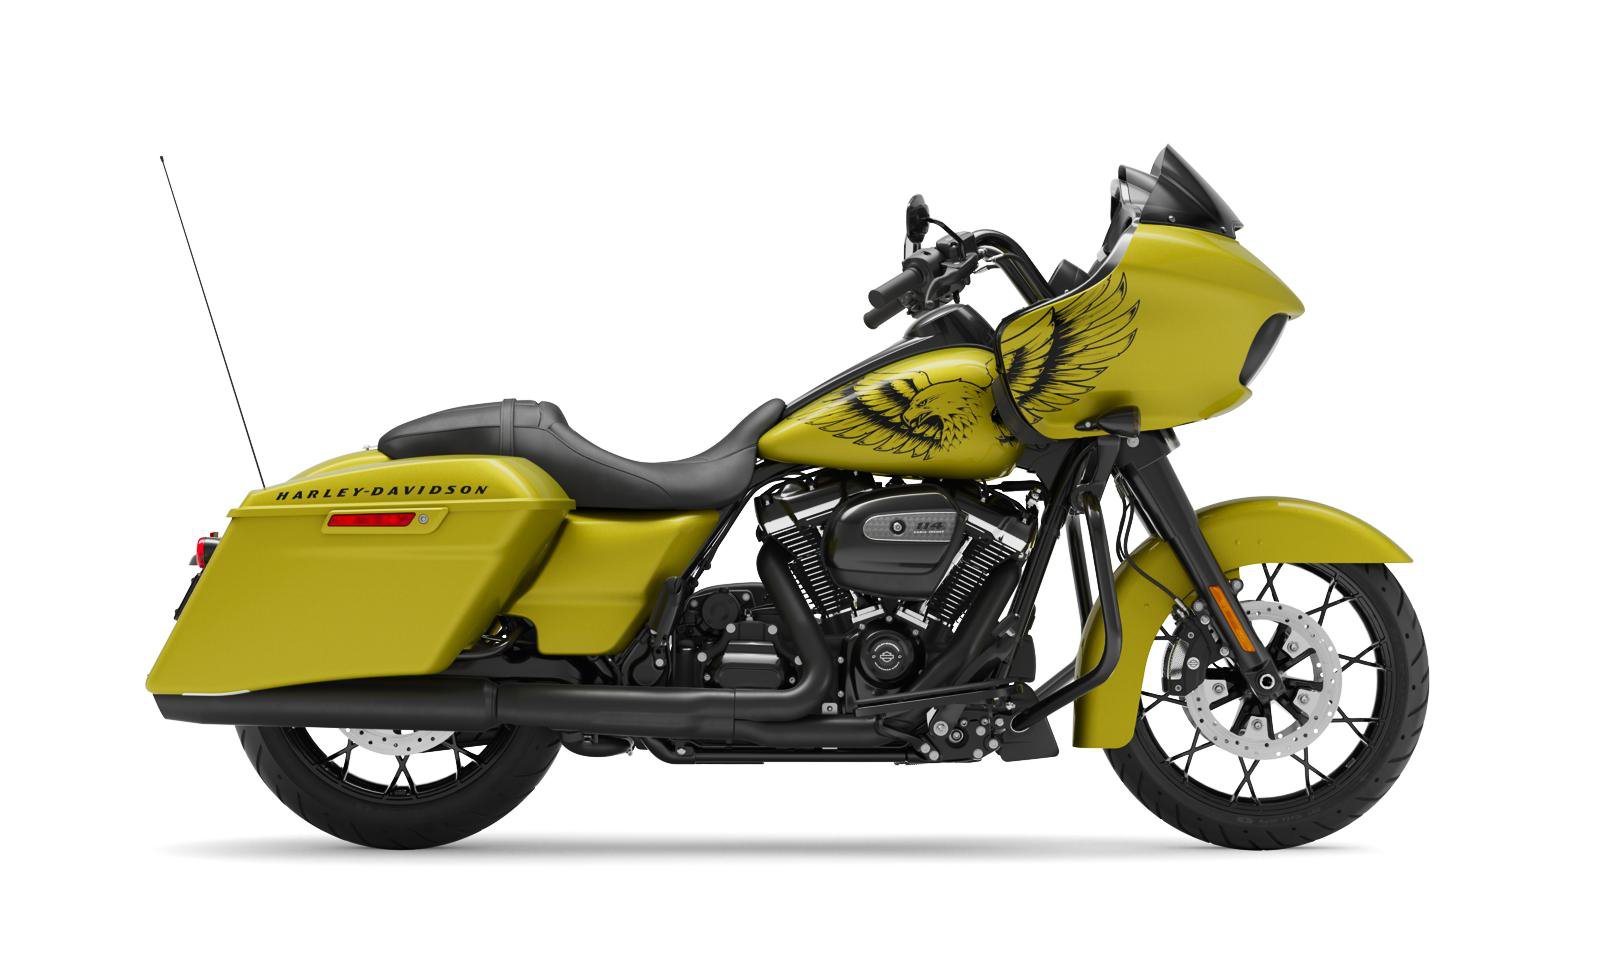 2020 Road Glide Special Motorcycle Harley Davidson Usa